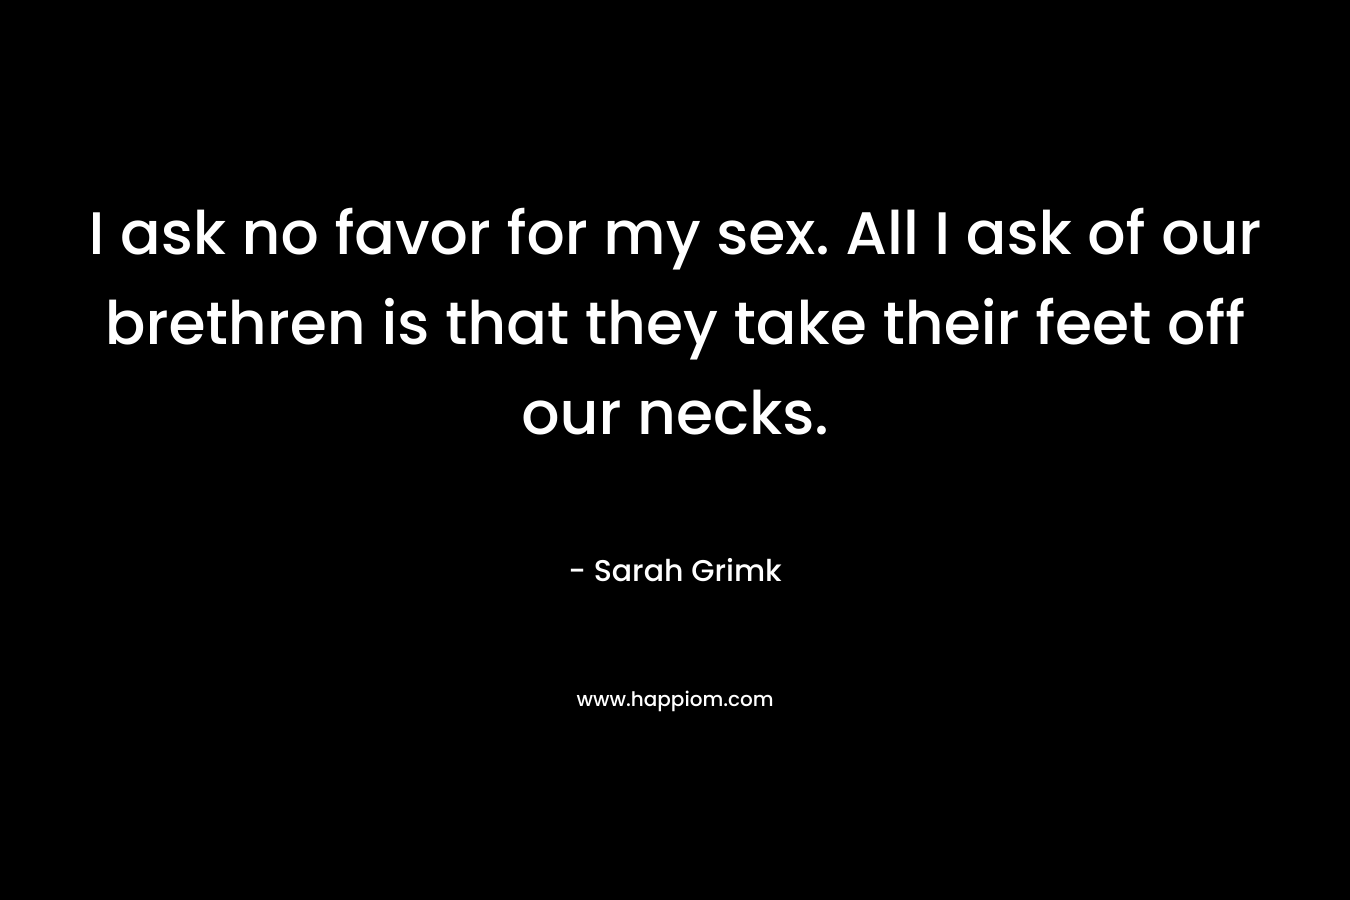 I ask no favor for my sex. All I ask of our brethren is that they take their feet off our necks. – Sarah Grimk